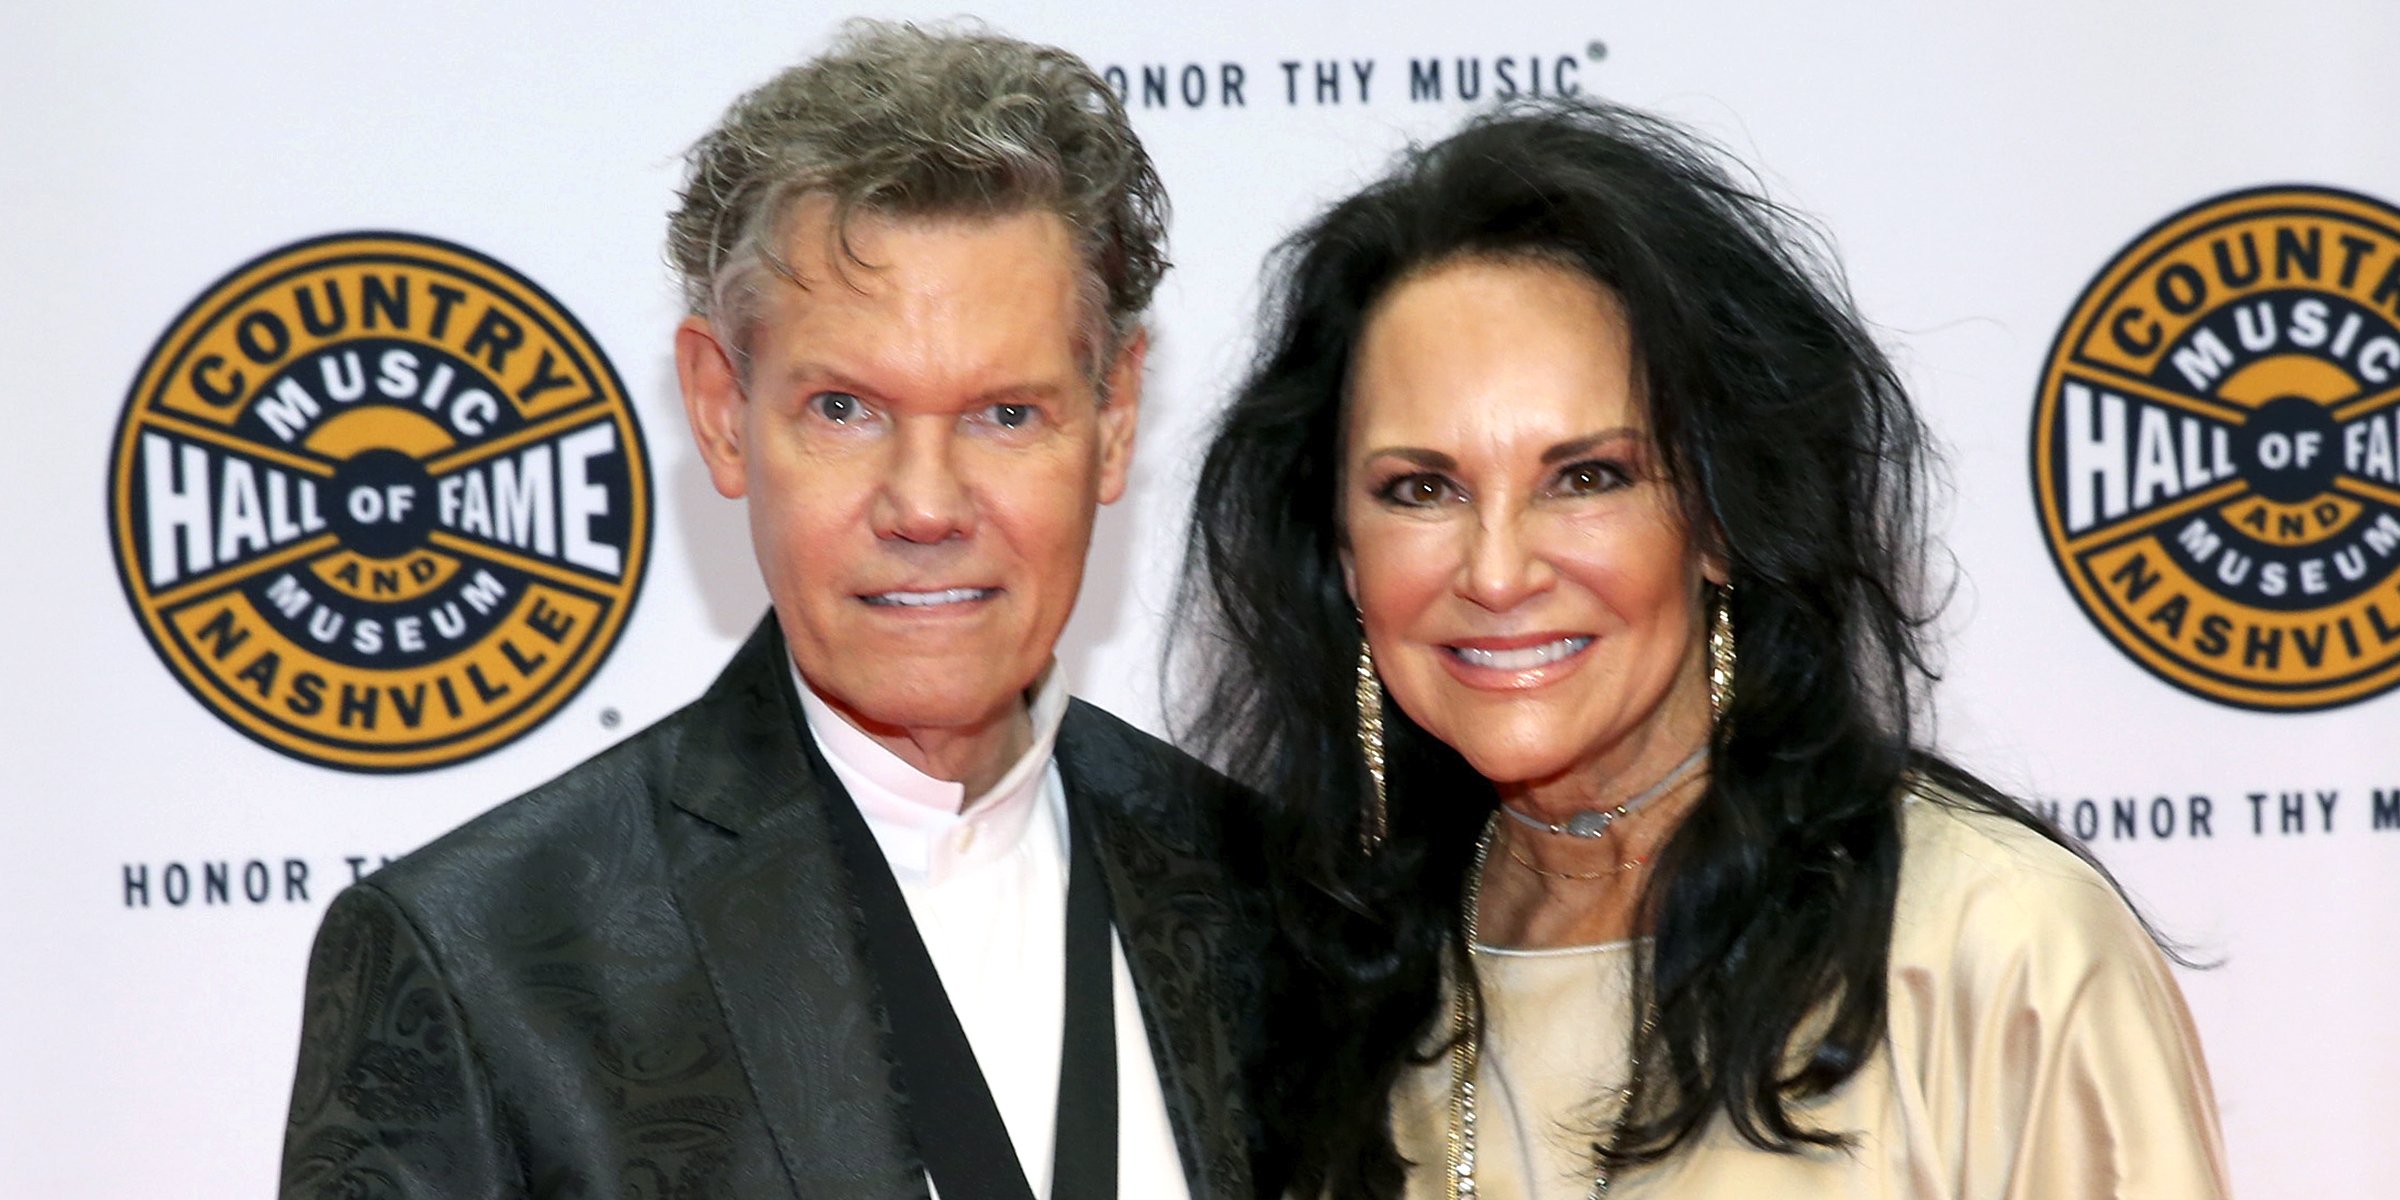 Randy Travis and Mary Beougher | Source: Getty Images